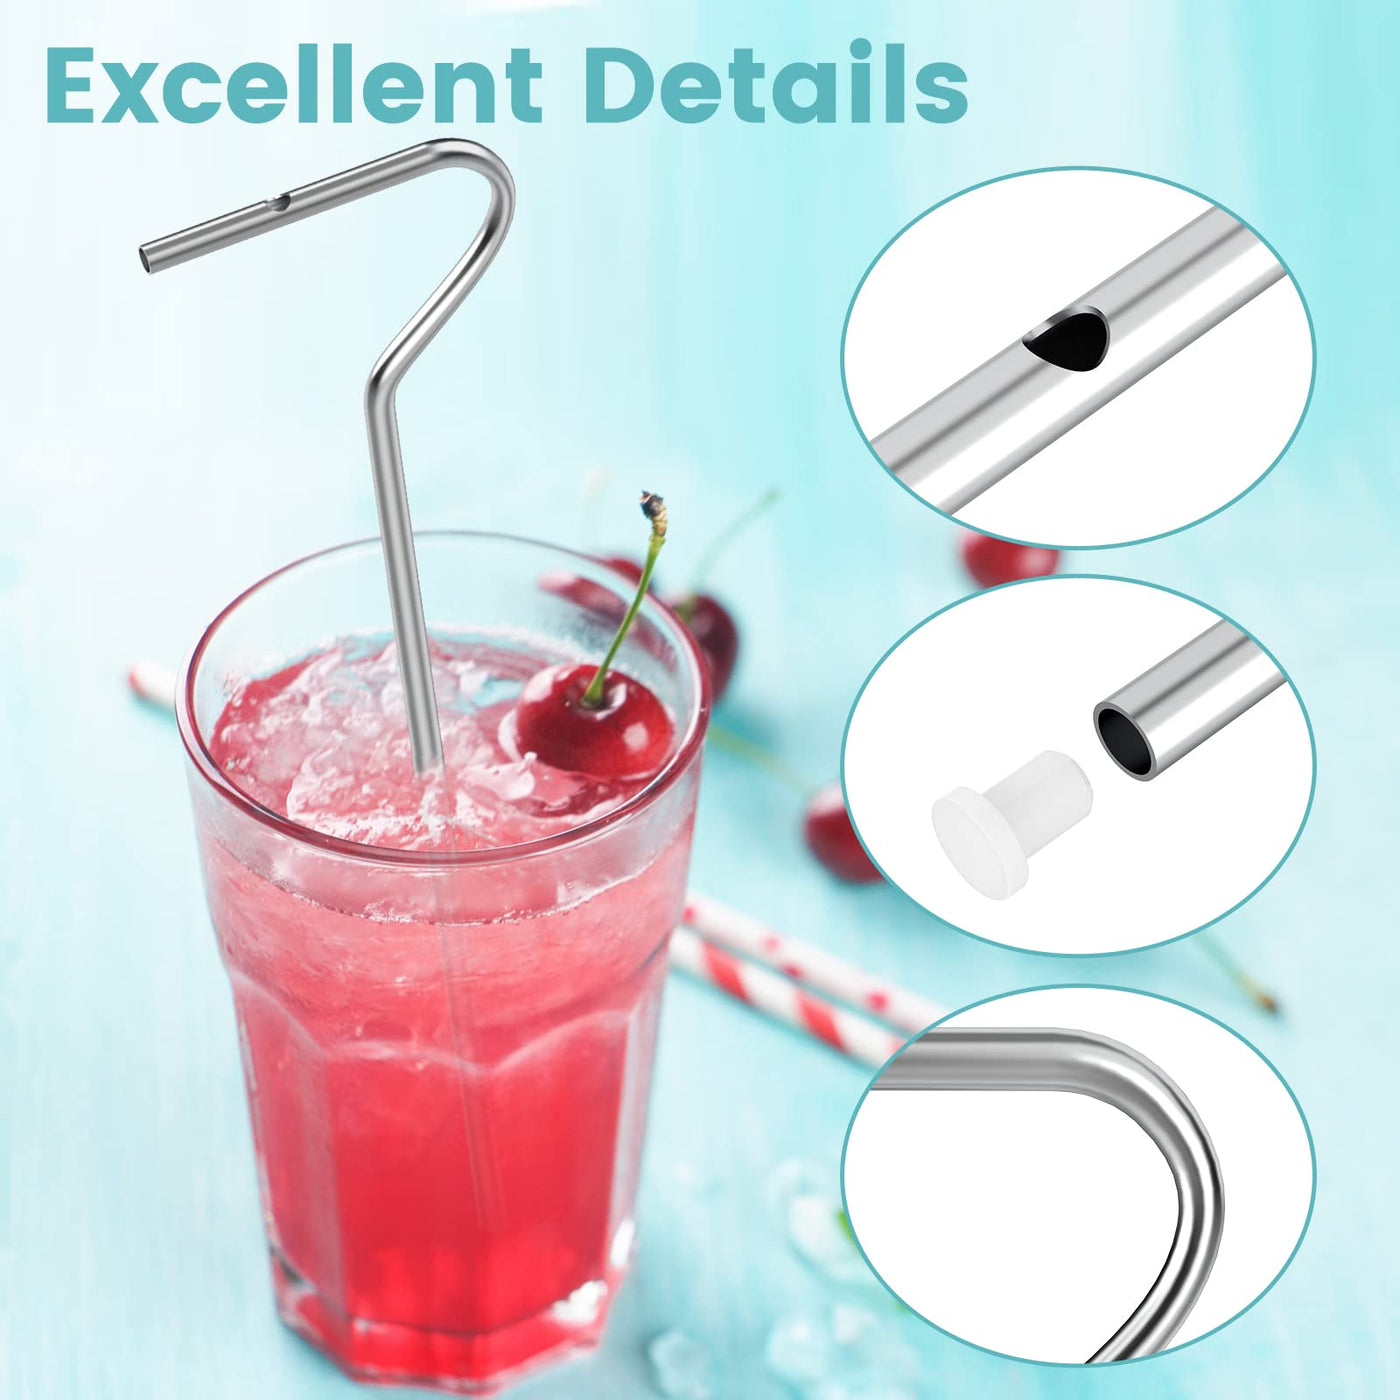 OUTXE Anti Wrinkle Straw 6 Pcs, Reusable Stainless Steel Drinking Straw, Wrinkle Free Long bended Metal Straw for Lip with Cleaning Brush and Carrying Bag, Fit Stanley Cup